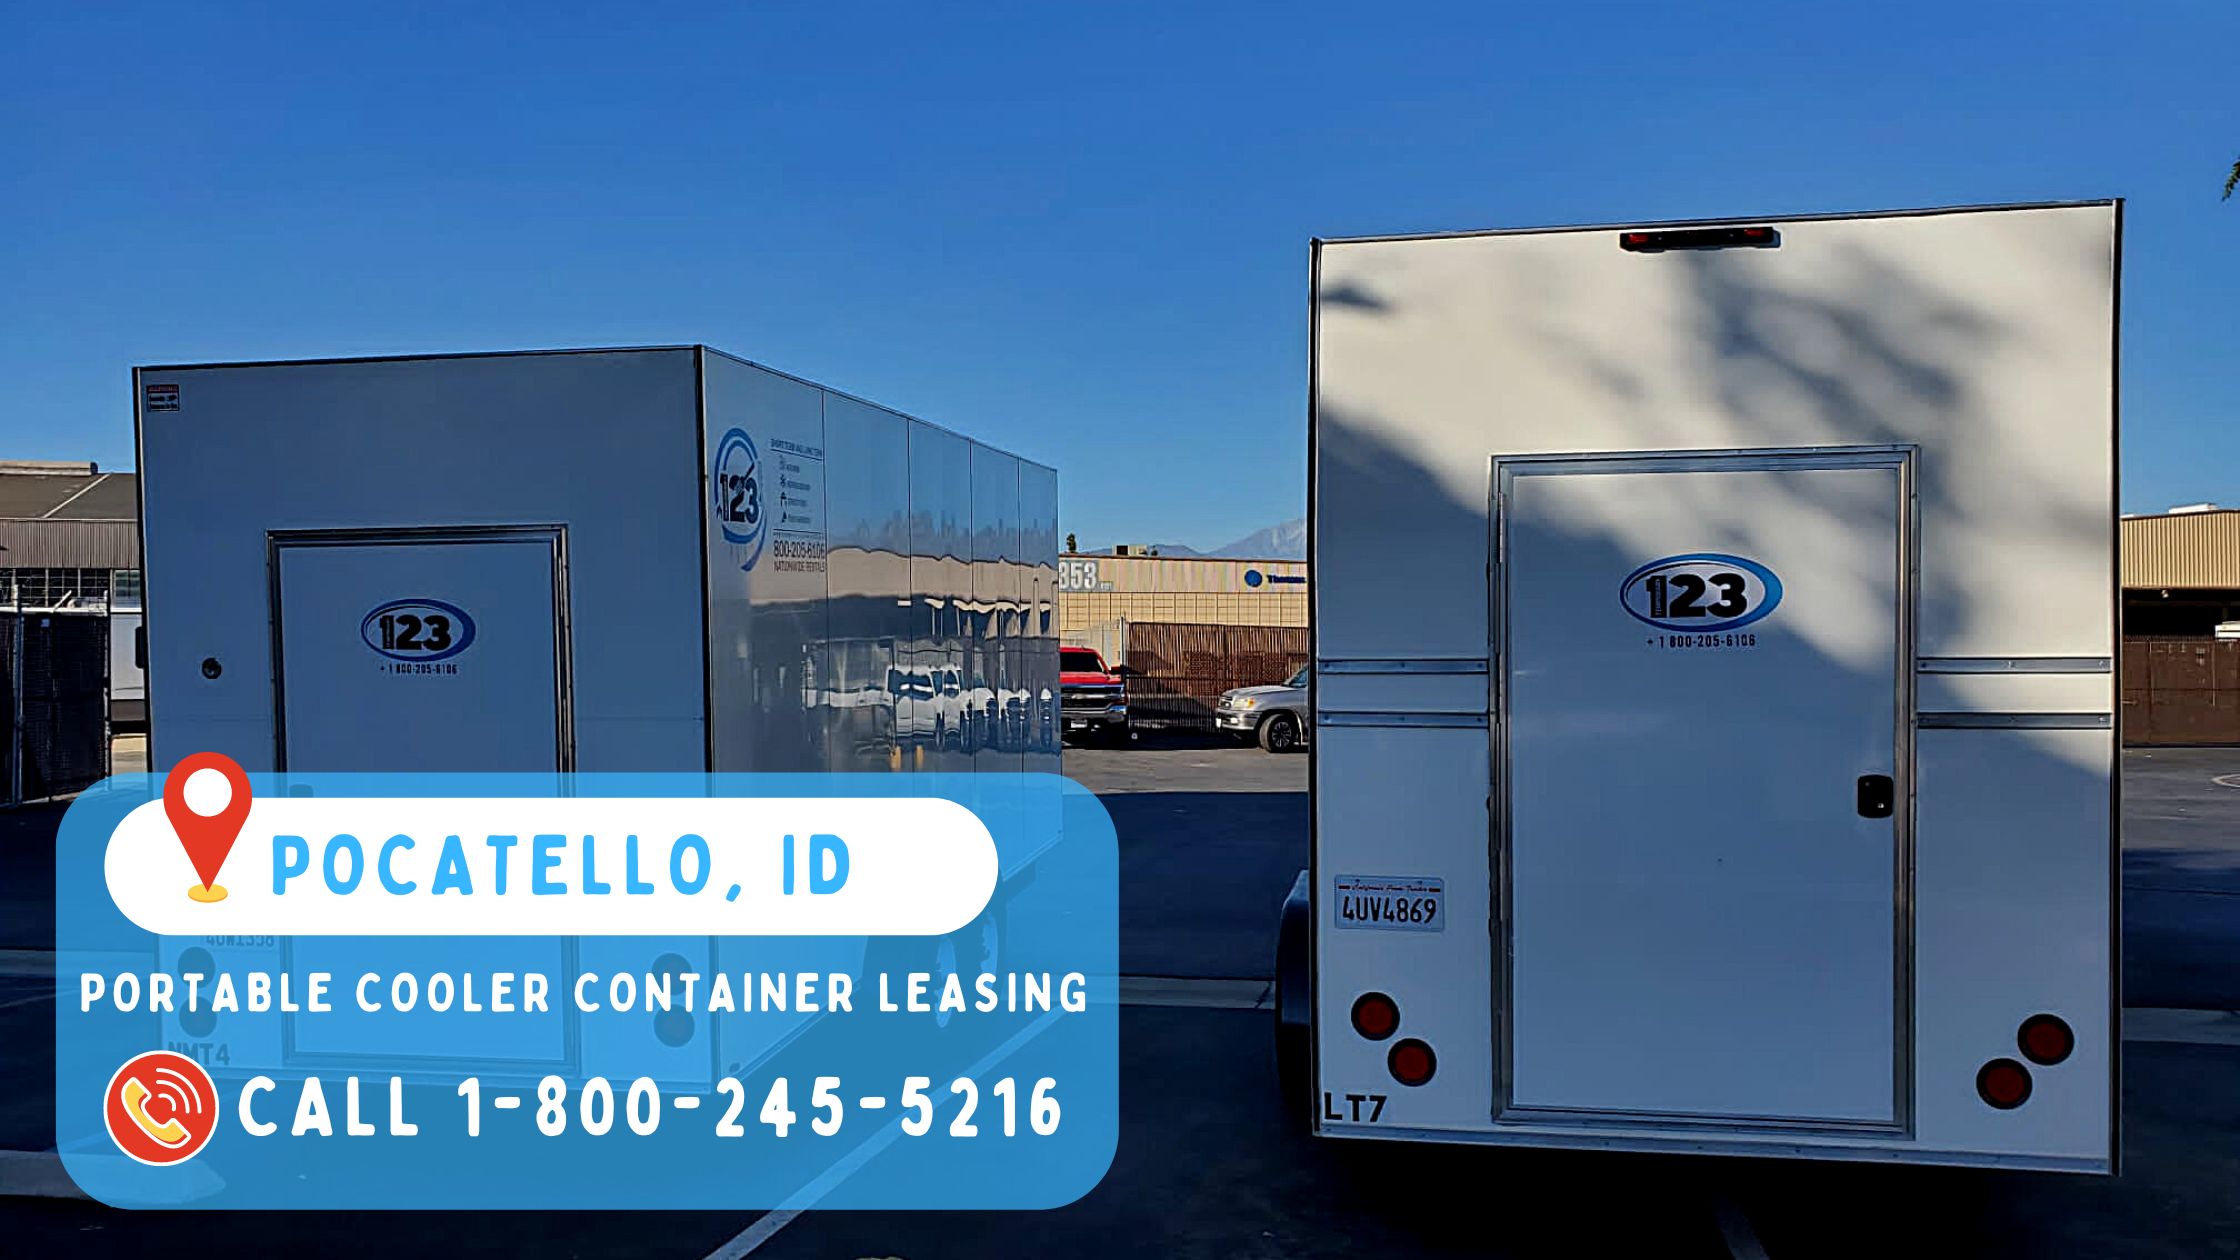 Portable Cooler Container Leasing in Pocatello, ID